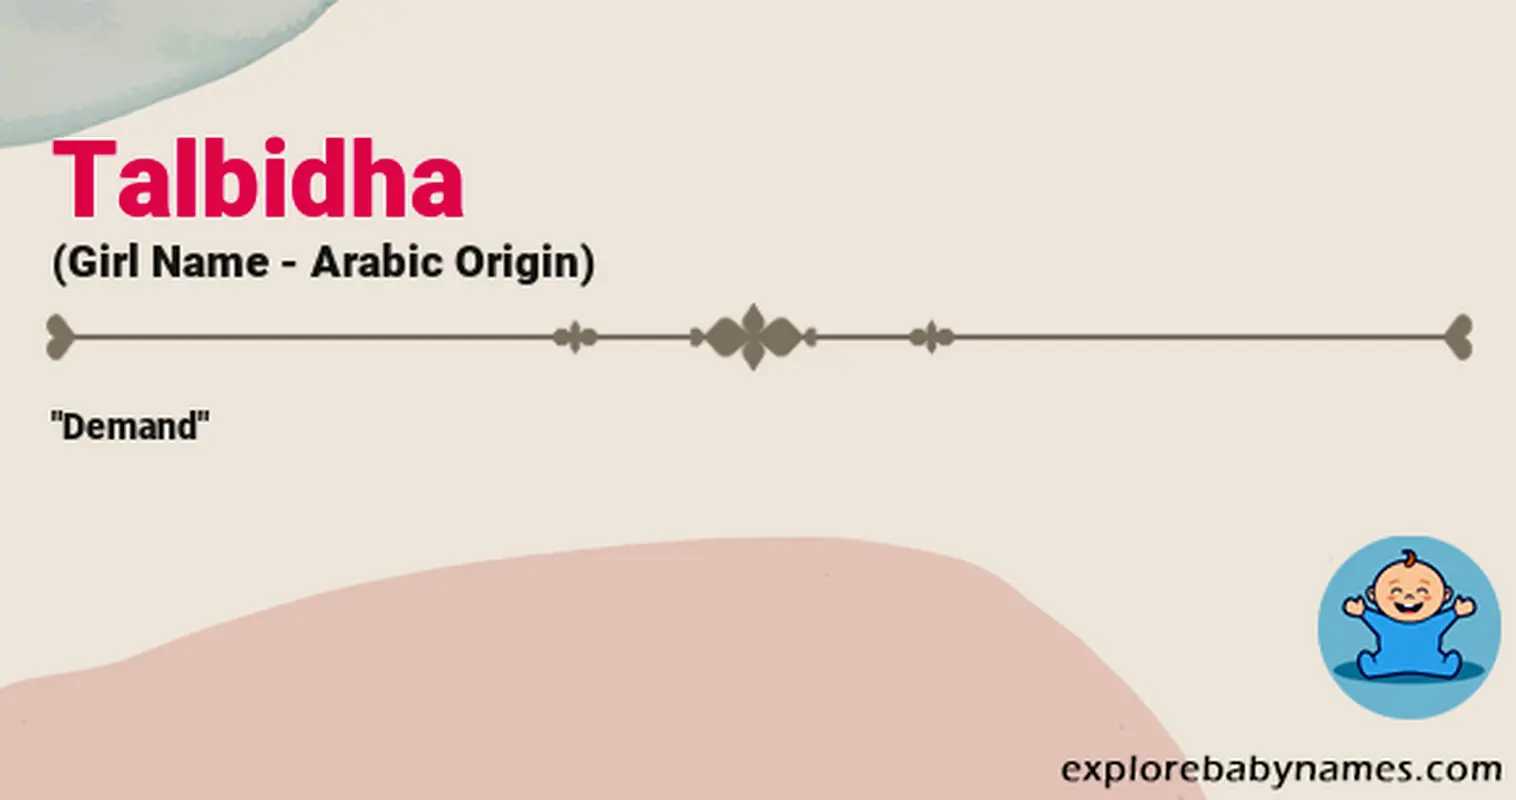 Meaning of Talbidha